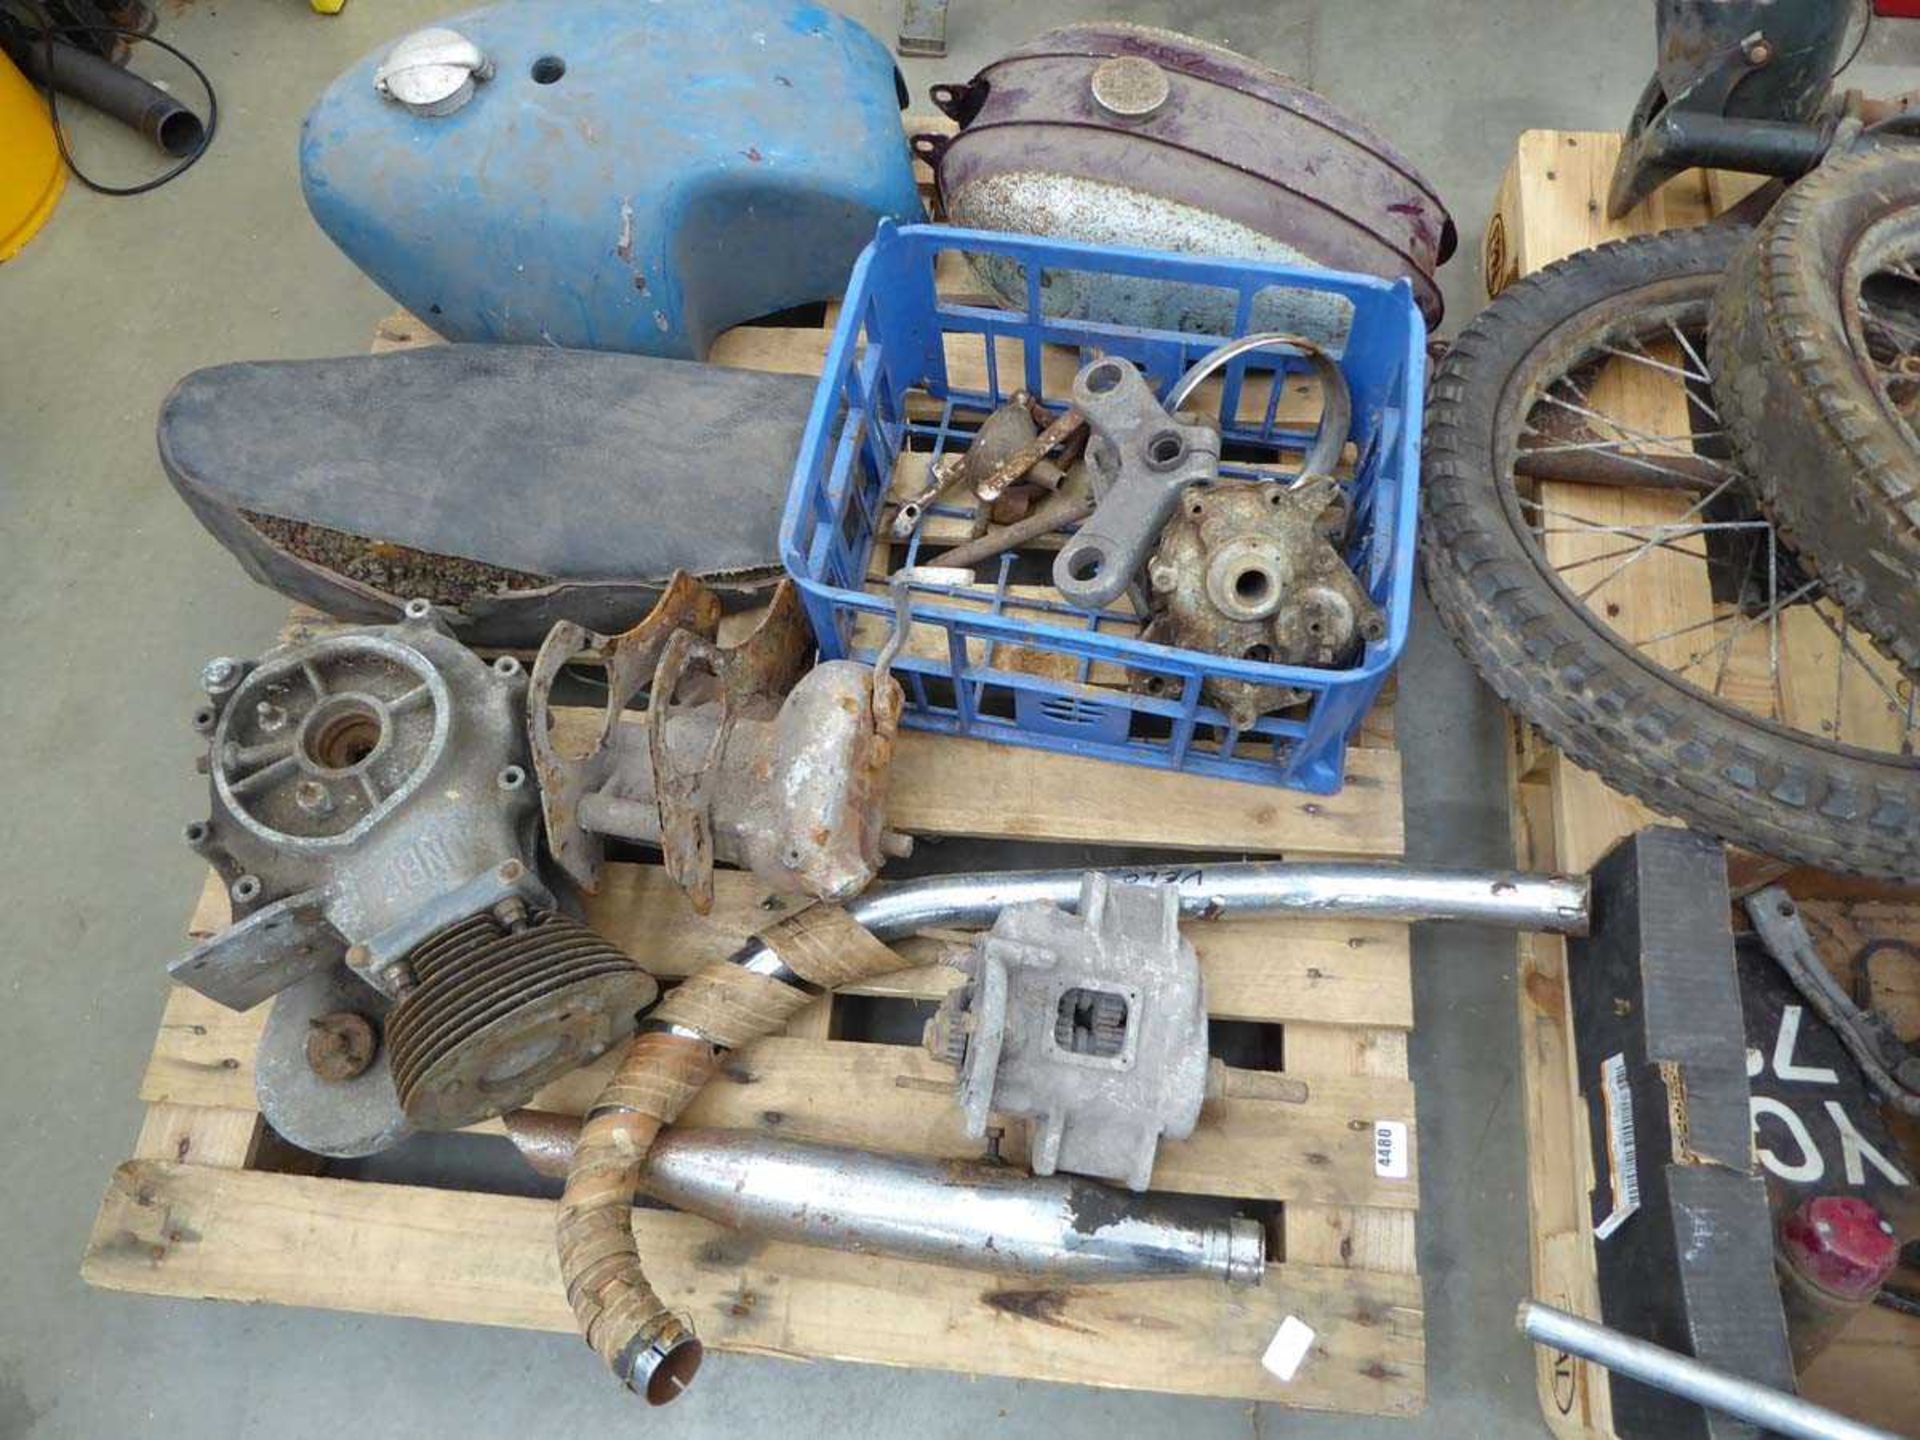 2 pallets of vintage motorcycle spares including wheels, tyres, handlebars, fuel tanks, seats, - Image 3 of 3